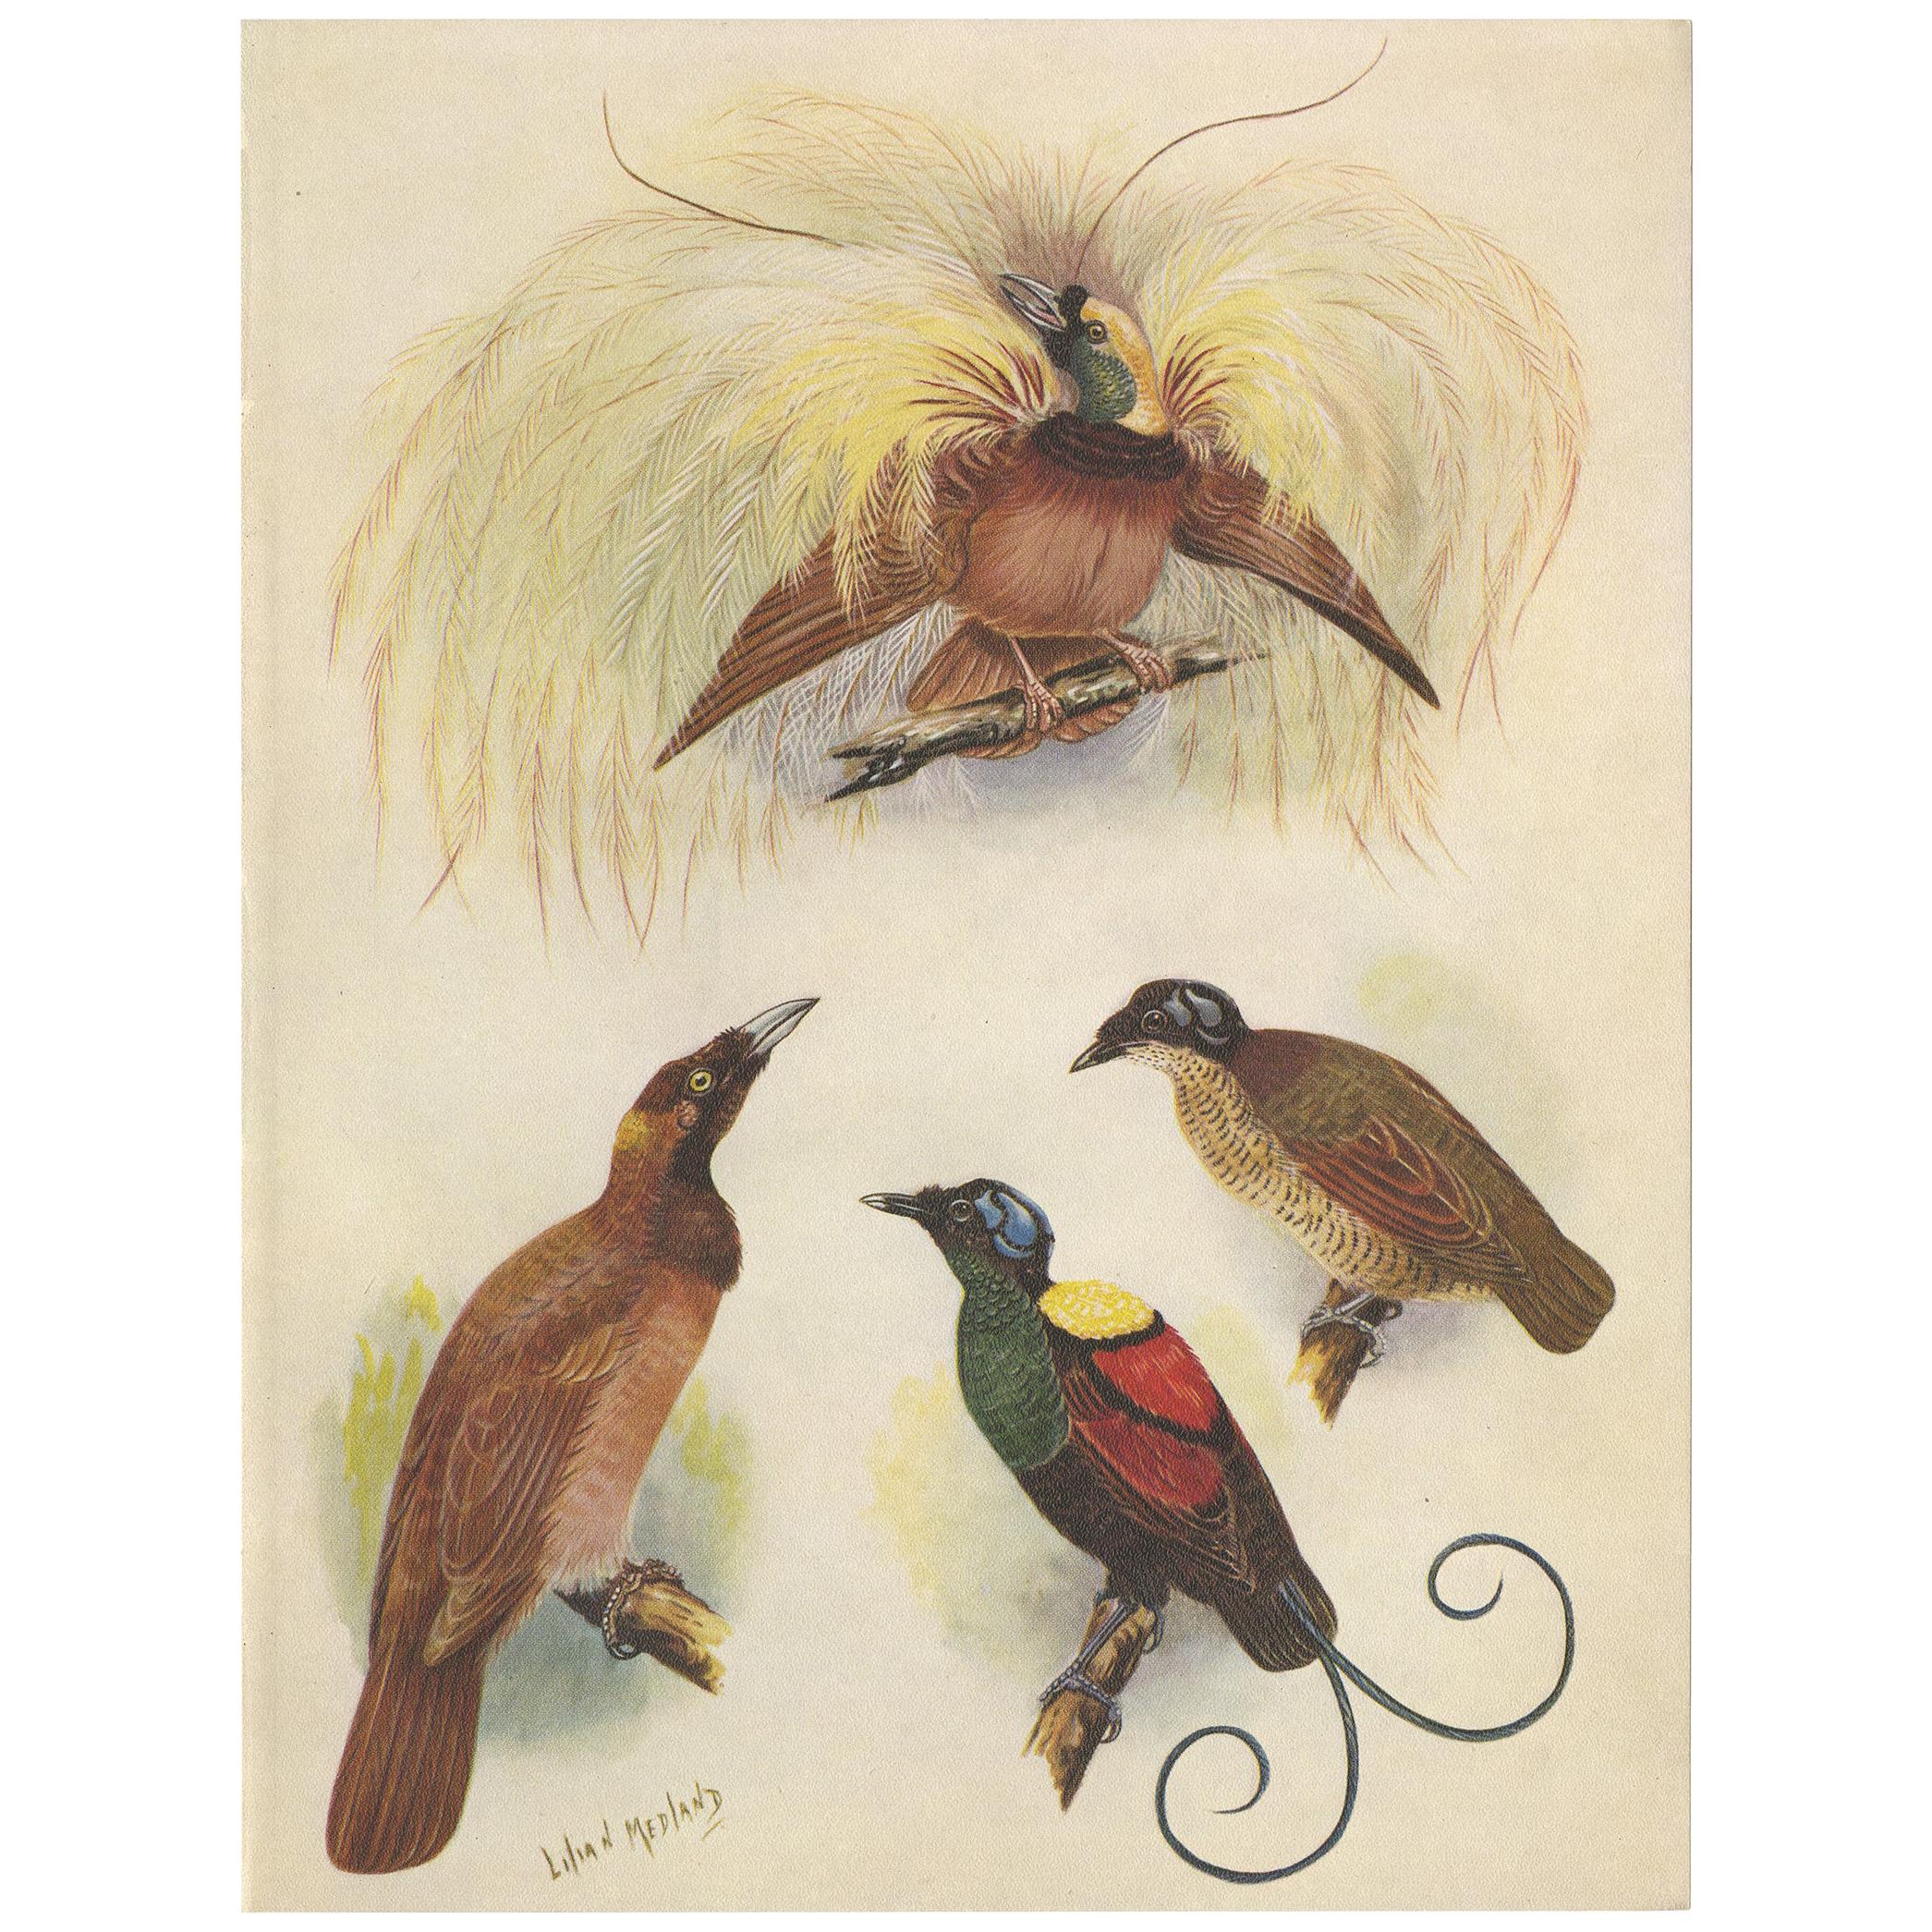 Antique Print of the Greater Bird of Paradise & the Bare-Headed Little King For Sale